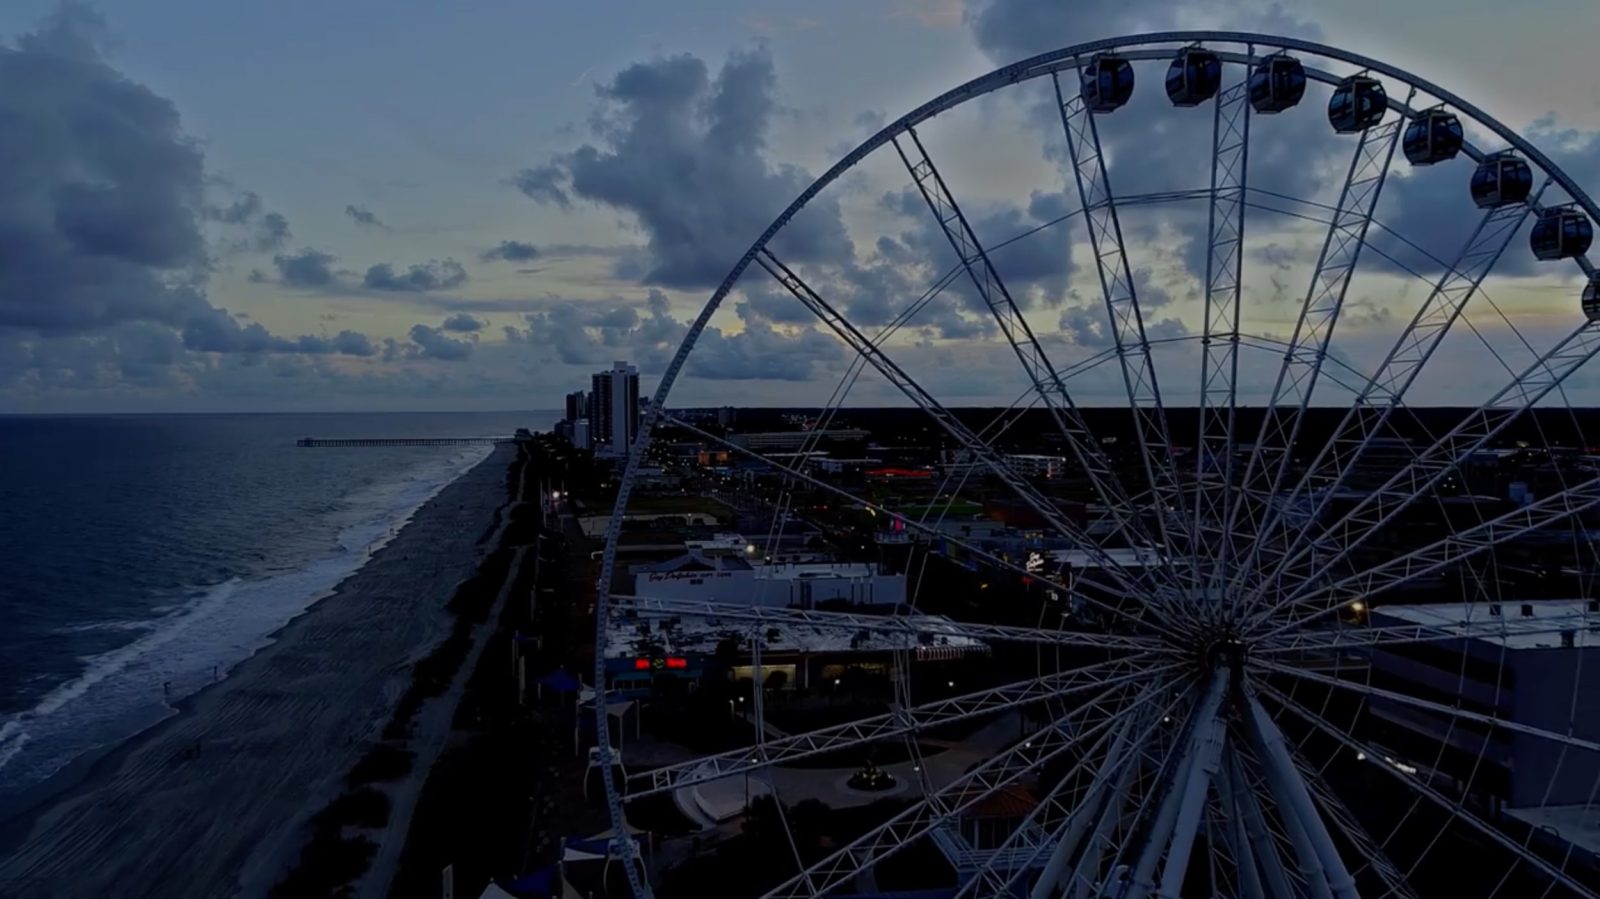 Drone video shows Myrtle Beach deserted as it braces for hurricane Florence